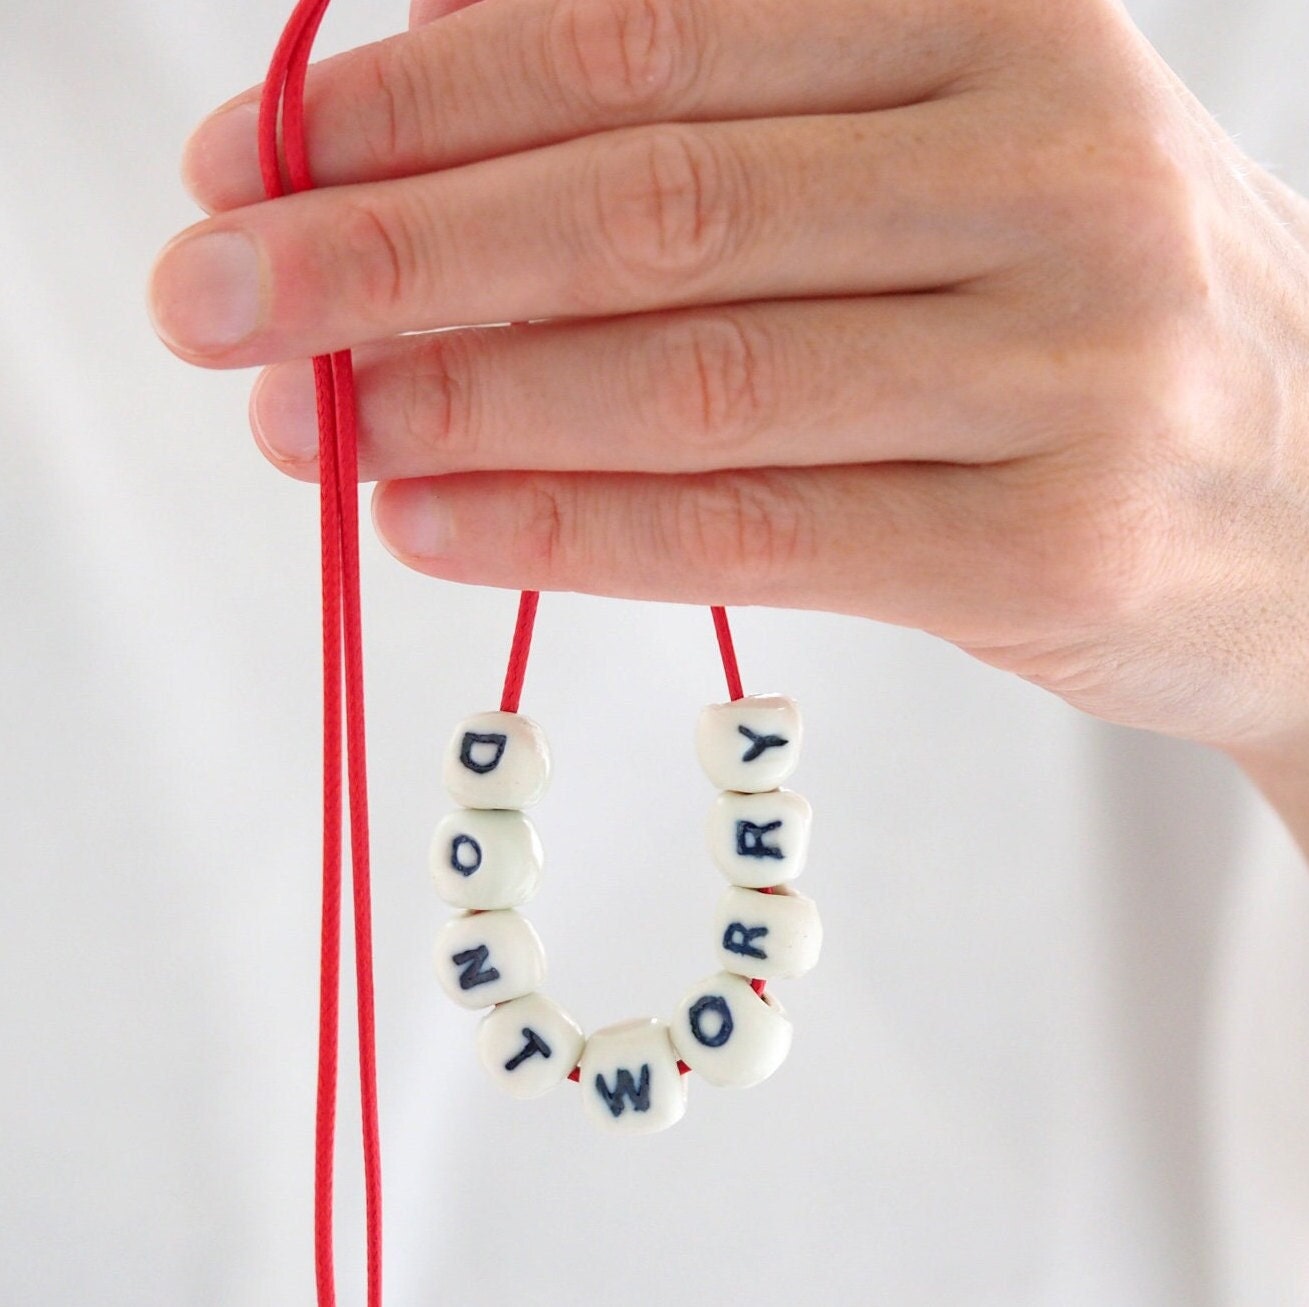 Don't Worry - Porcelain Bead Necklace